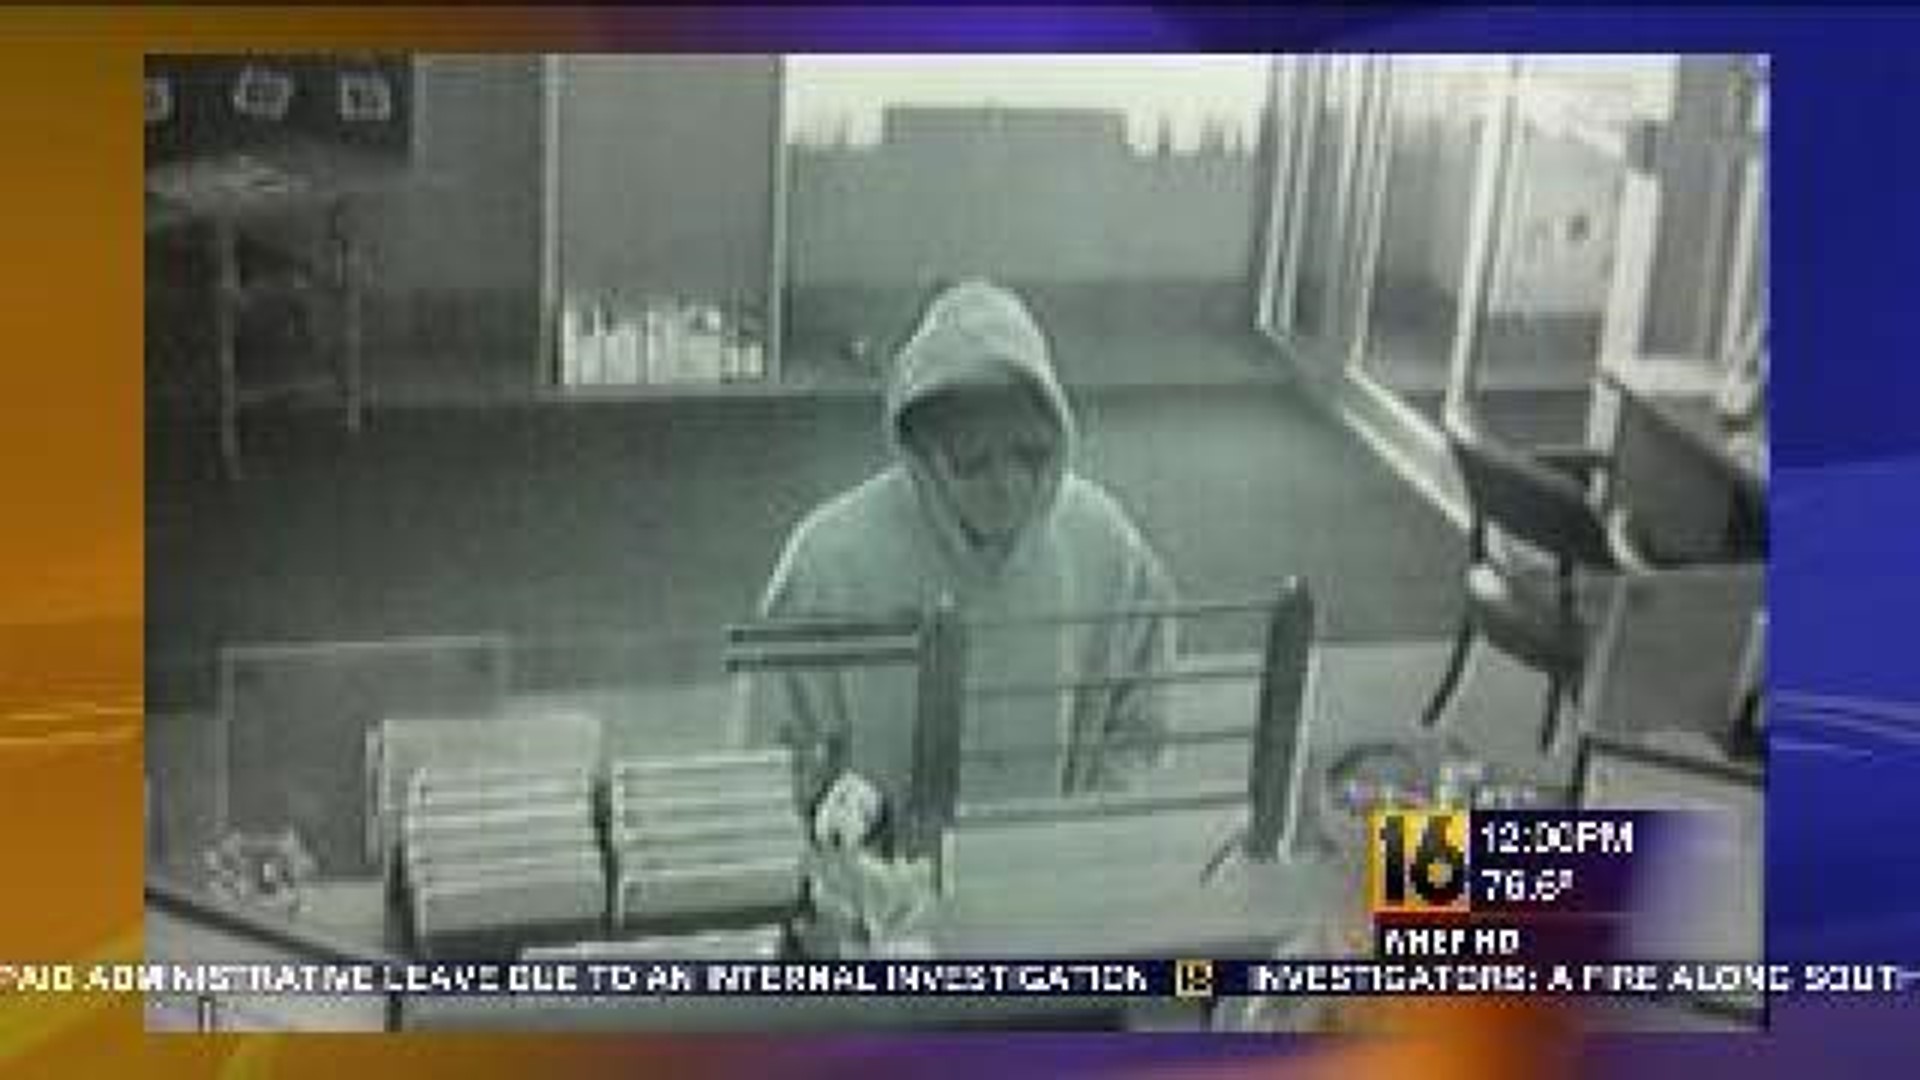 Update: Thief Loose After Bank Robbery